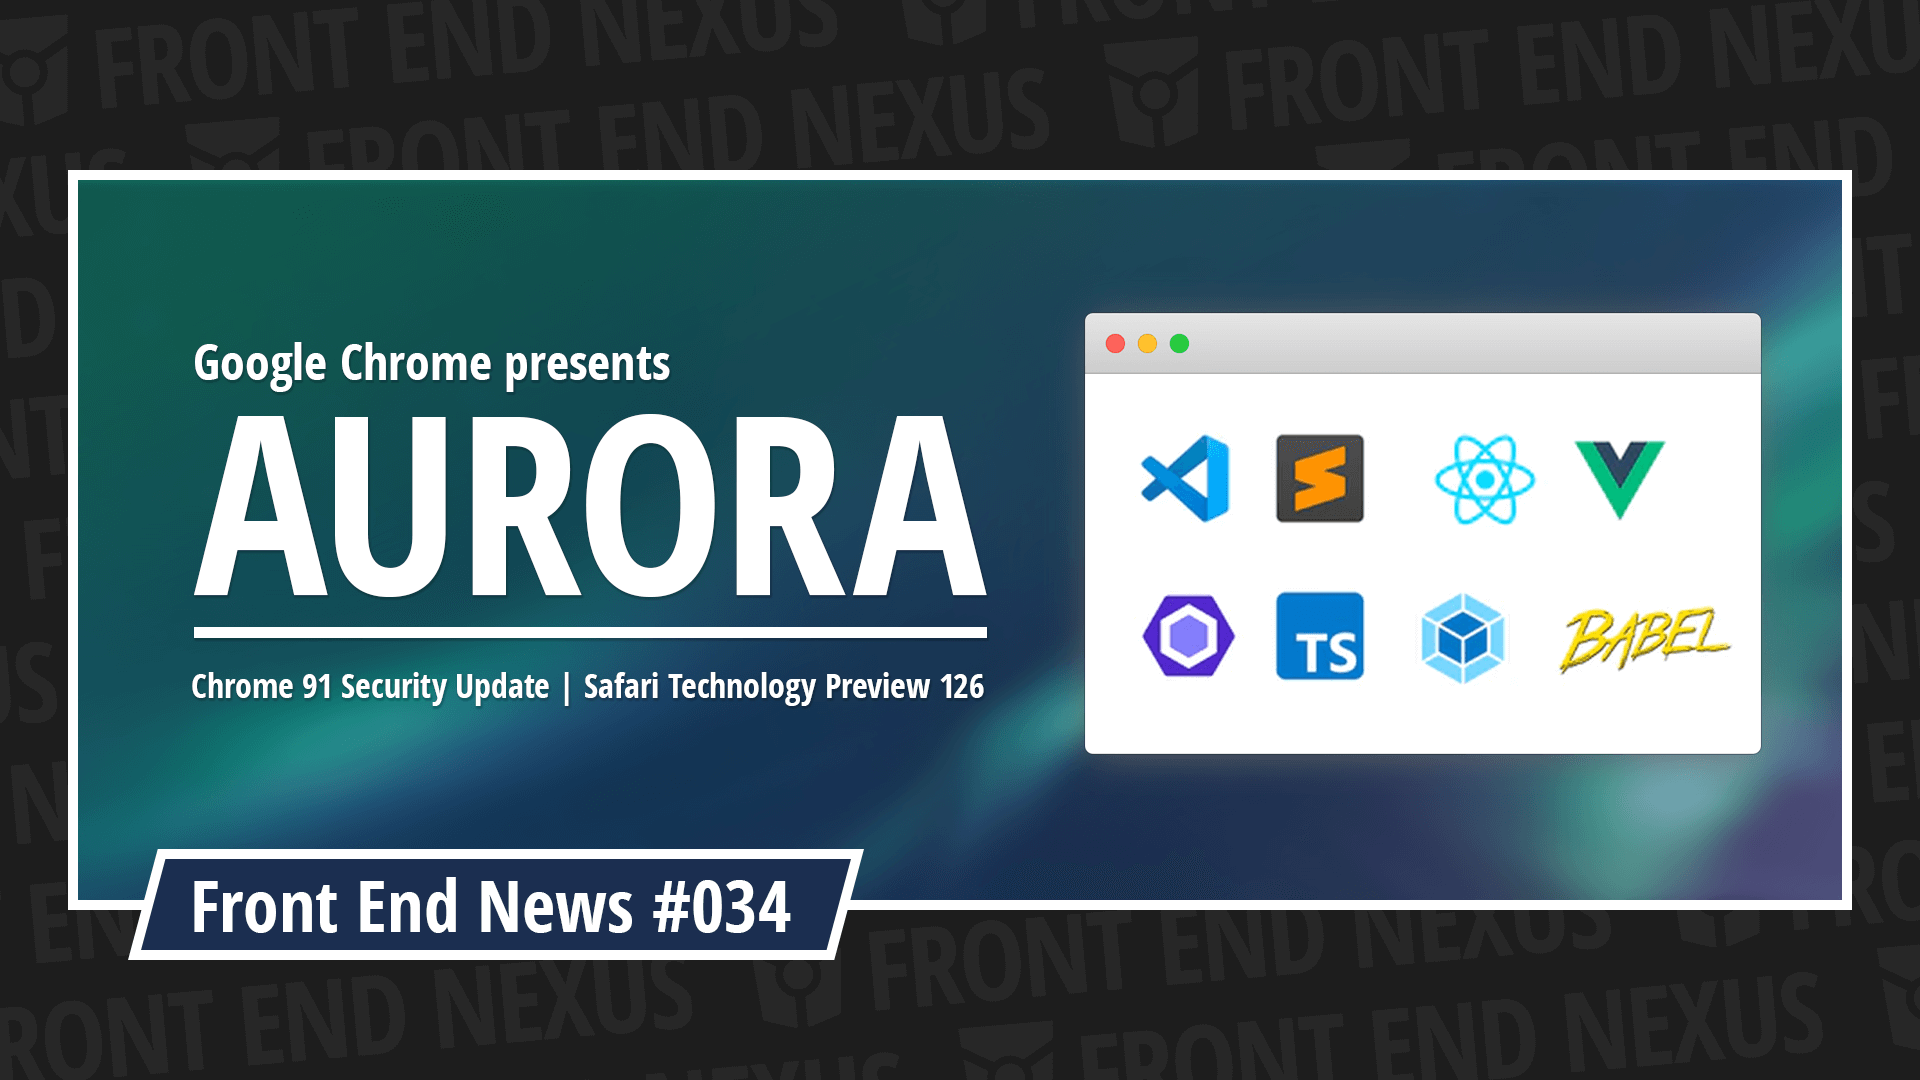 The Google Chrome team reveals Aurora, Security Patch for Chrome 91, and Safari Technology Preview 126 | Front End News #034